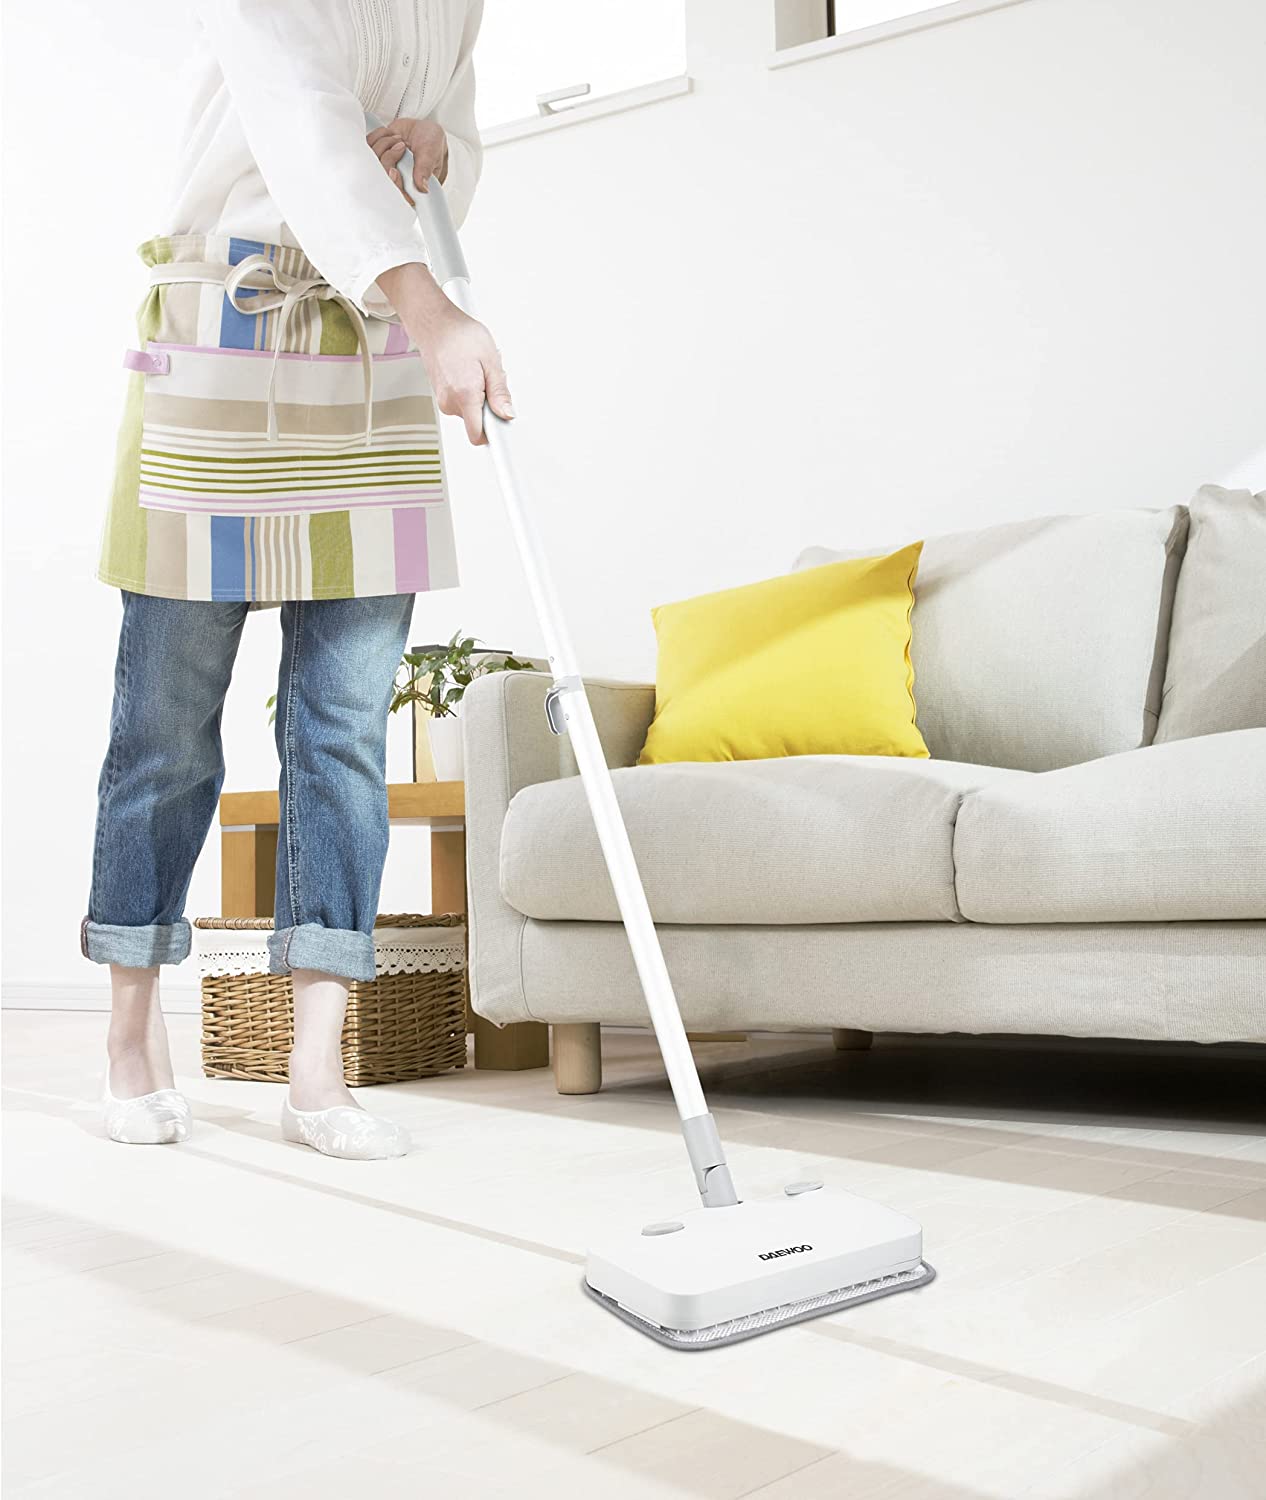 Brown Box Multifunction Steam Mop with High Steam, Microfiber Pad 1000W